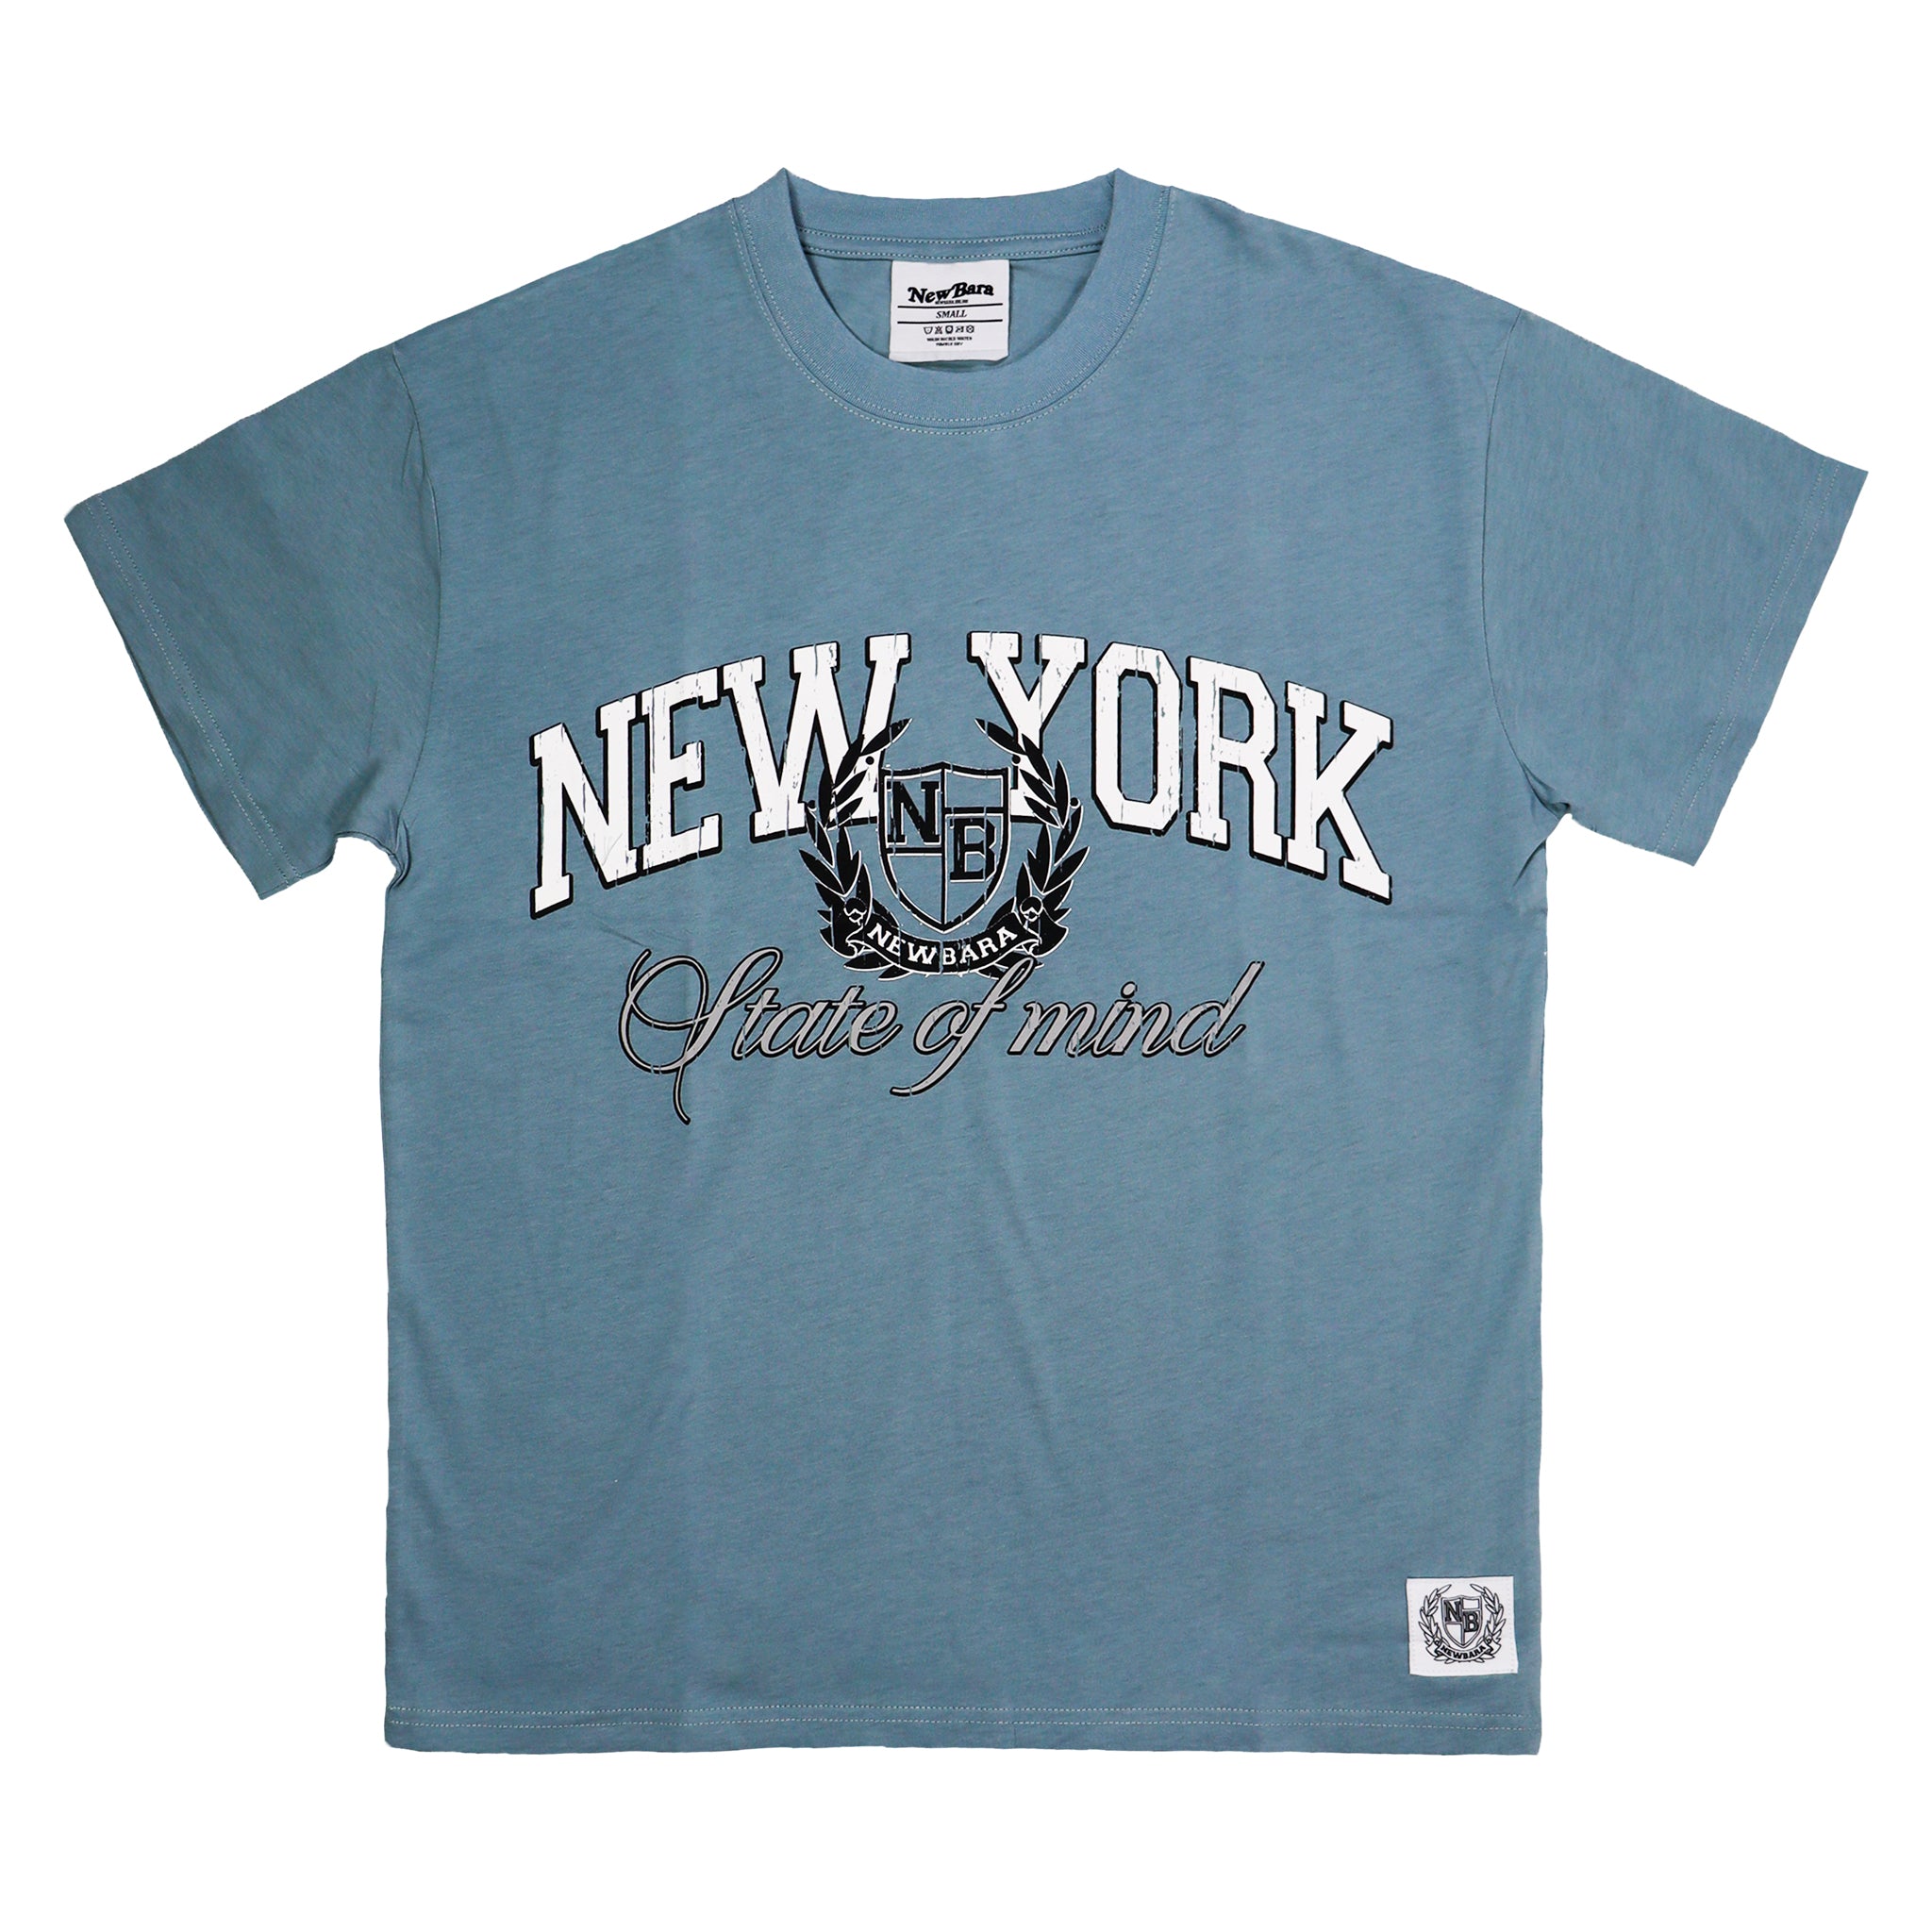 New York State Of Mind T-Shirt